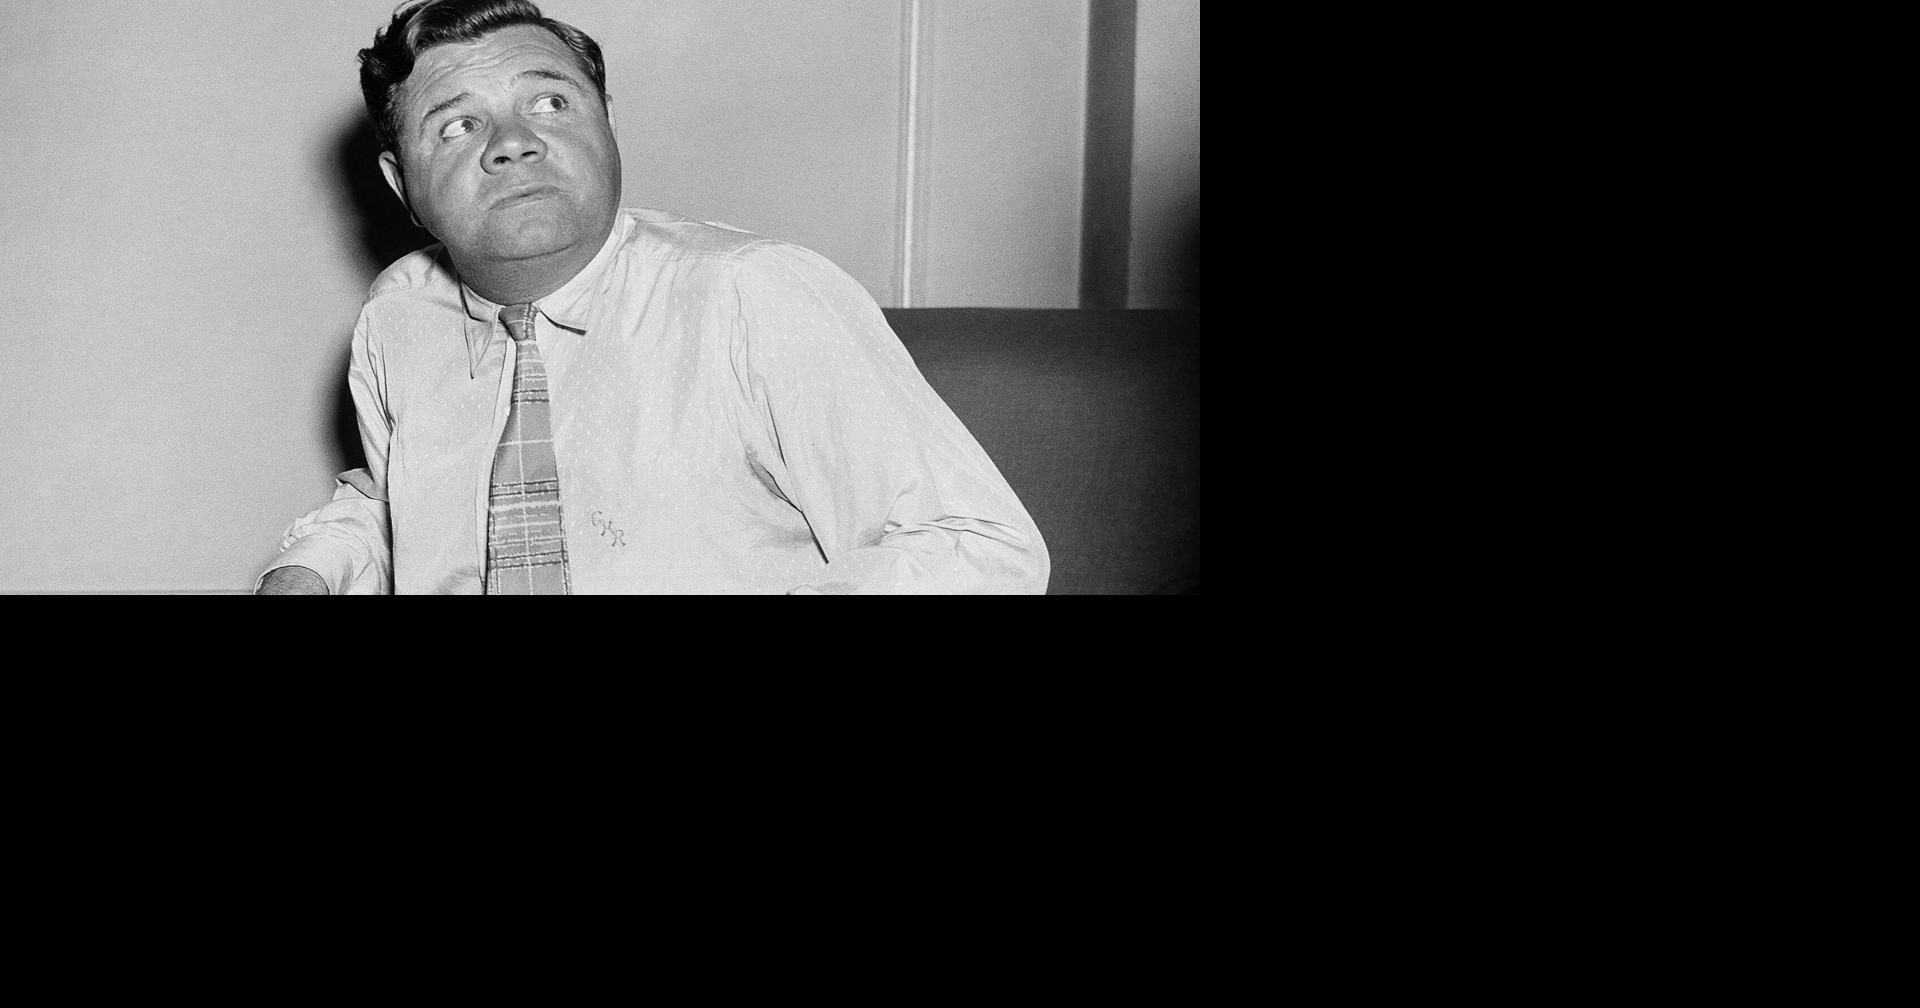 June 2, 1935 – Babe Ruth, 40, announced his retirement from